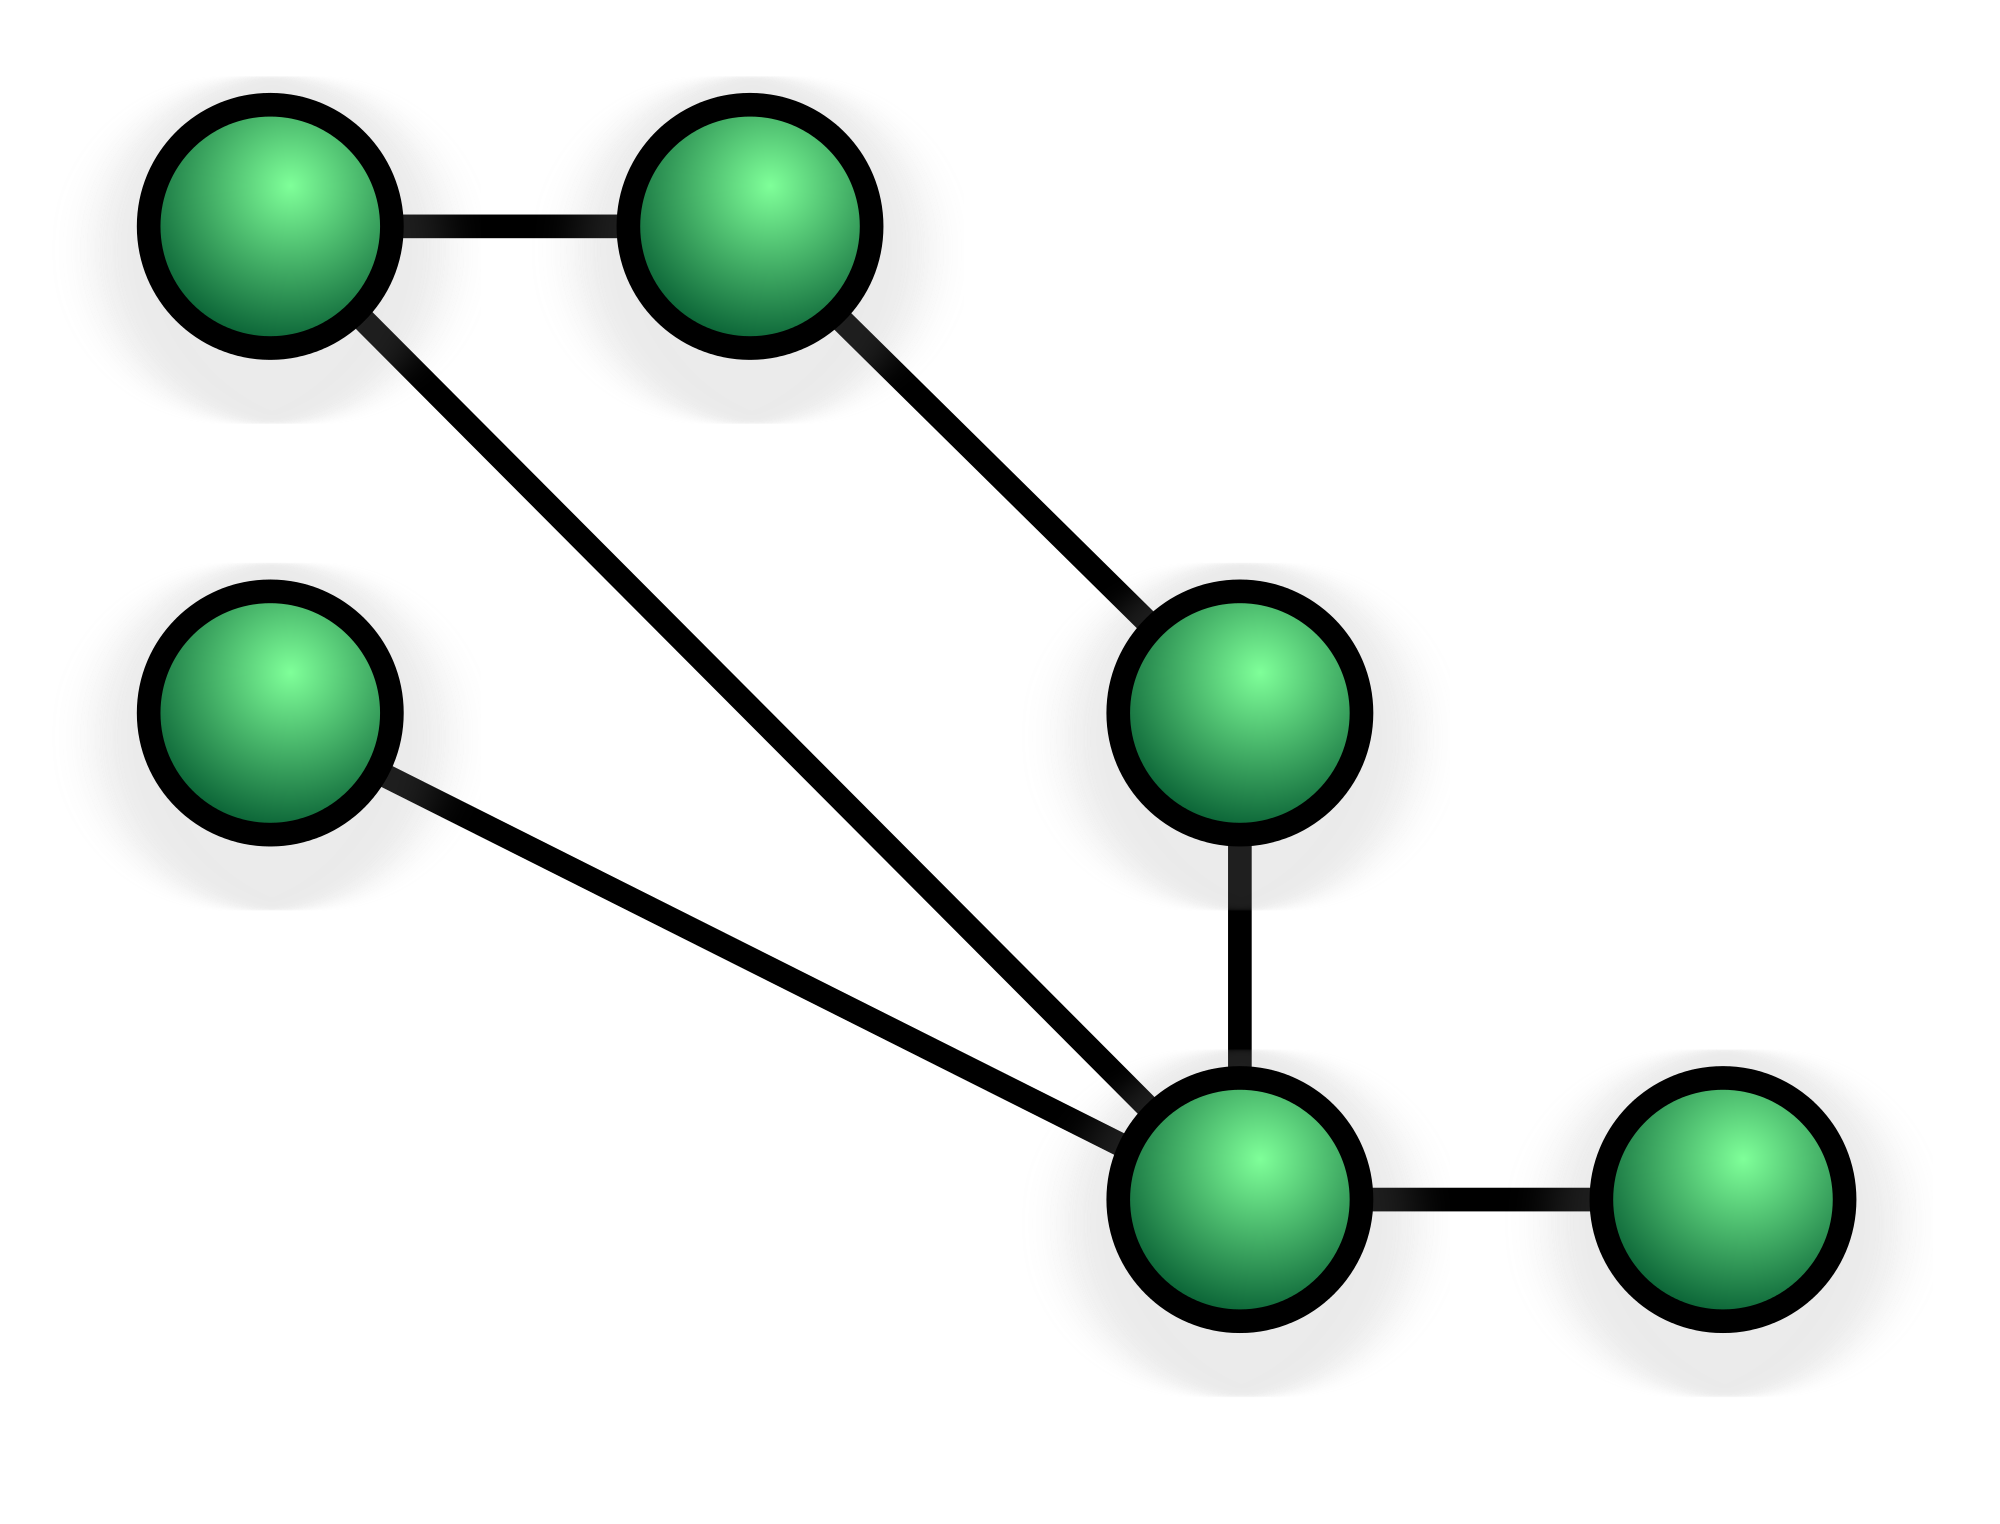 network topology clipart - photo #16